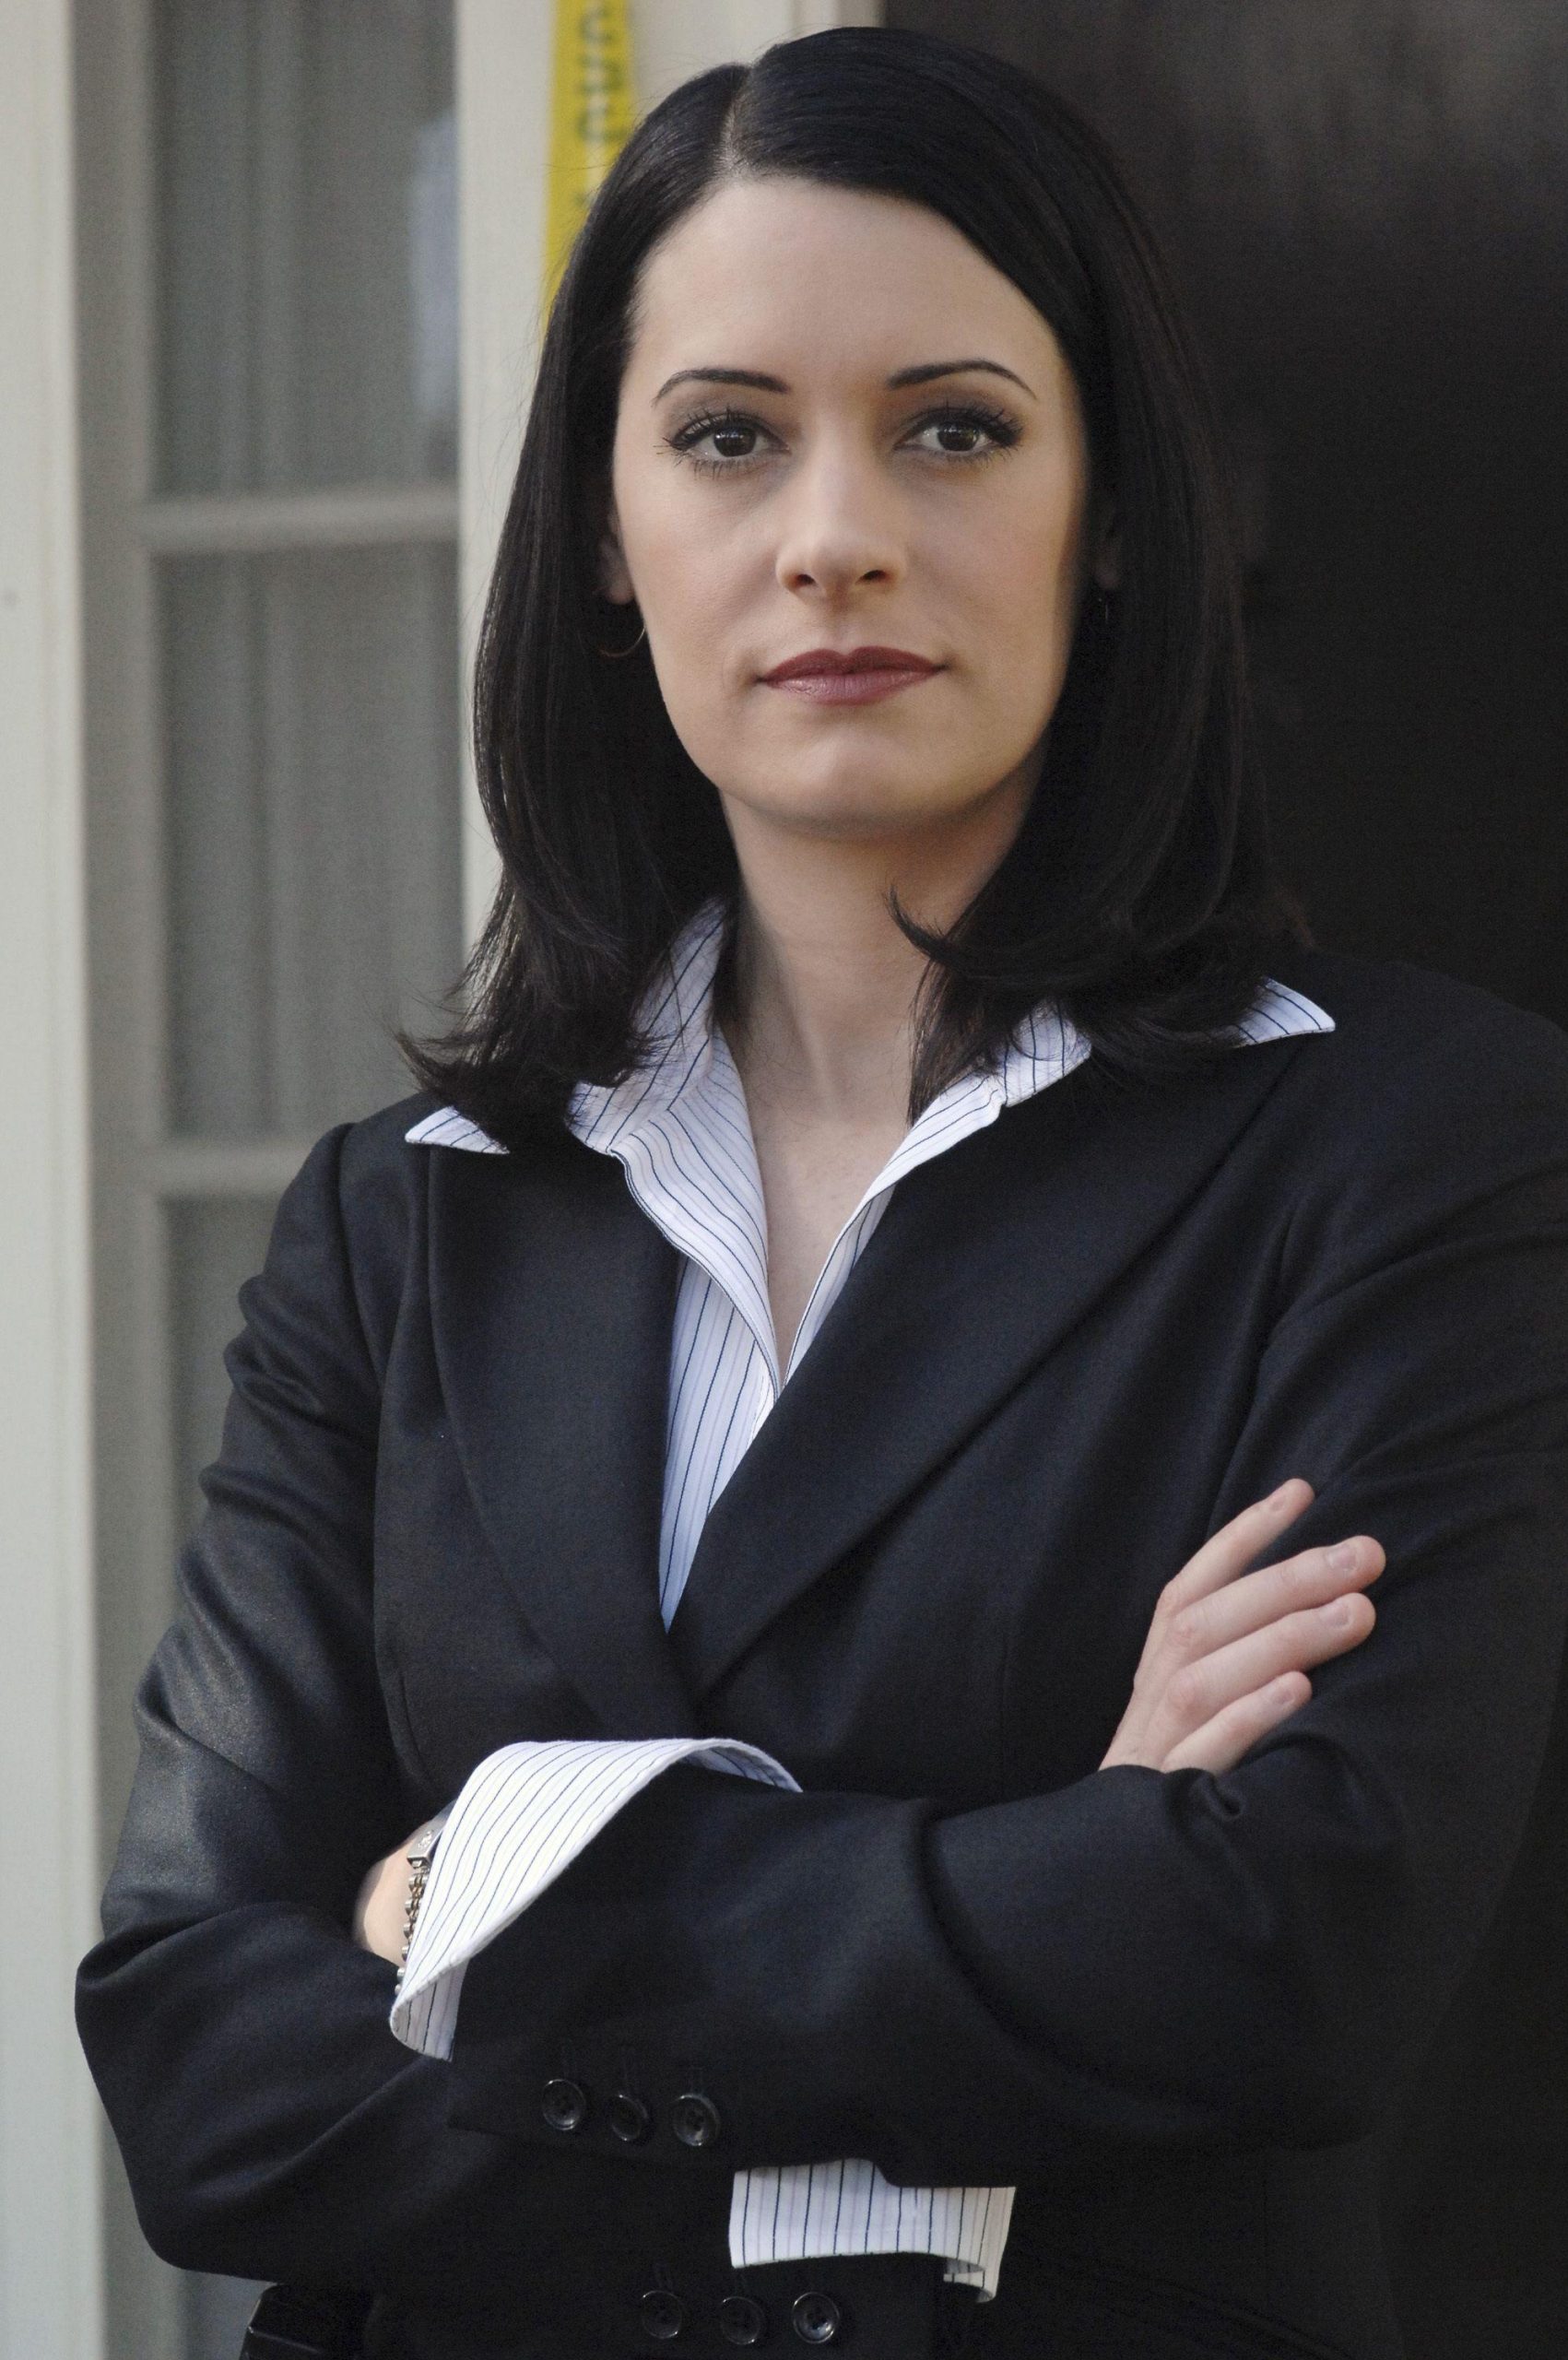 70+ Hot Pictures Of Paget Brewster From Criminal Minds Will Brighten Up Your Day 38